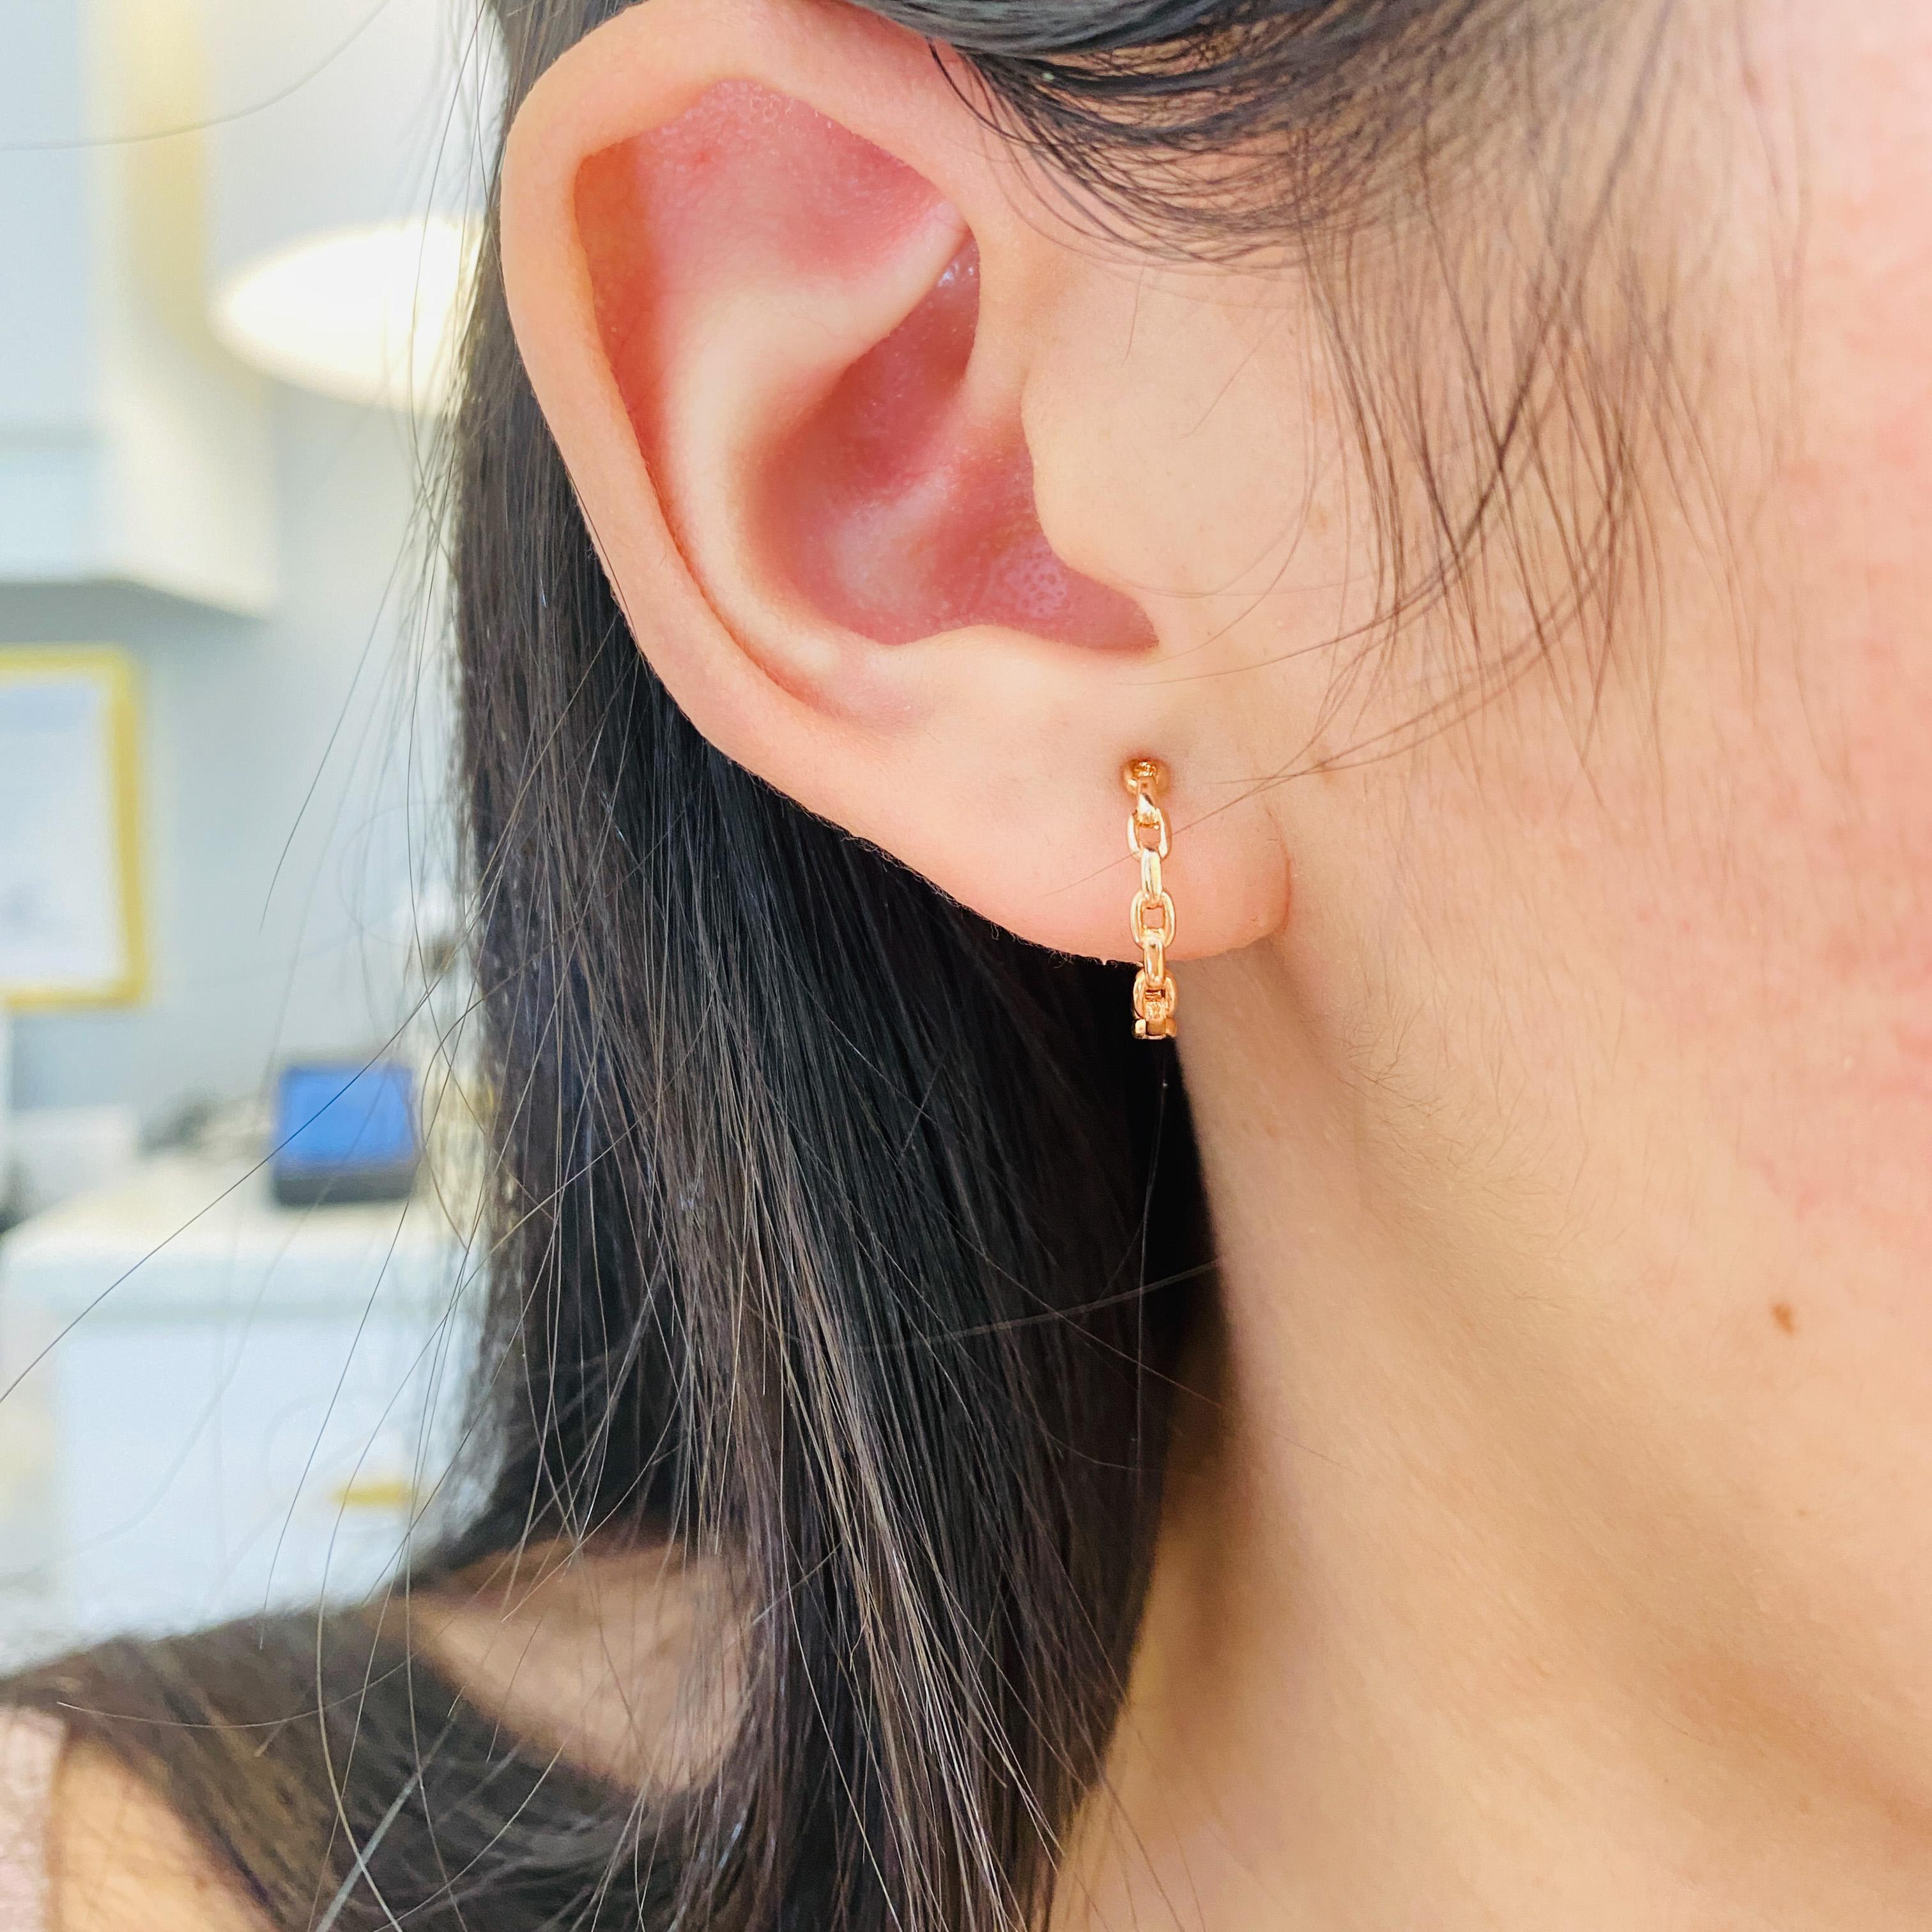 These rose gold hoop earrings are fabulous! The link design is just like a gorgeous cable link necklace formed into a loop to accent any look or earring stack you choose. The classic hoop design with the modern open chain look makes a great